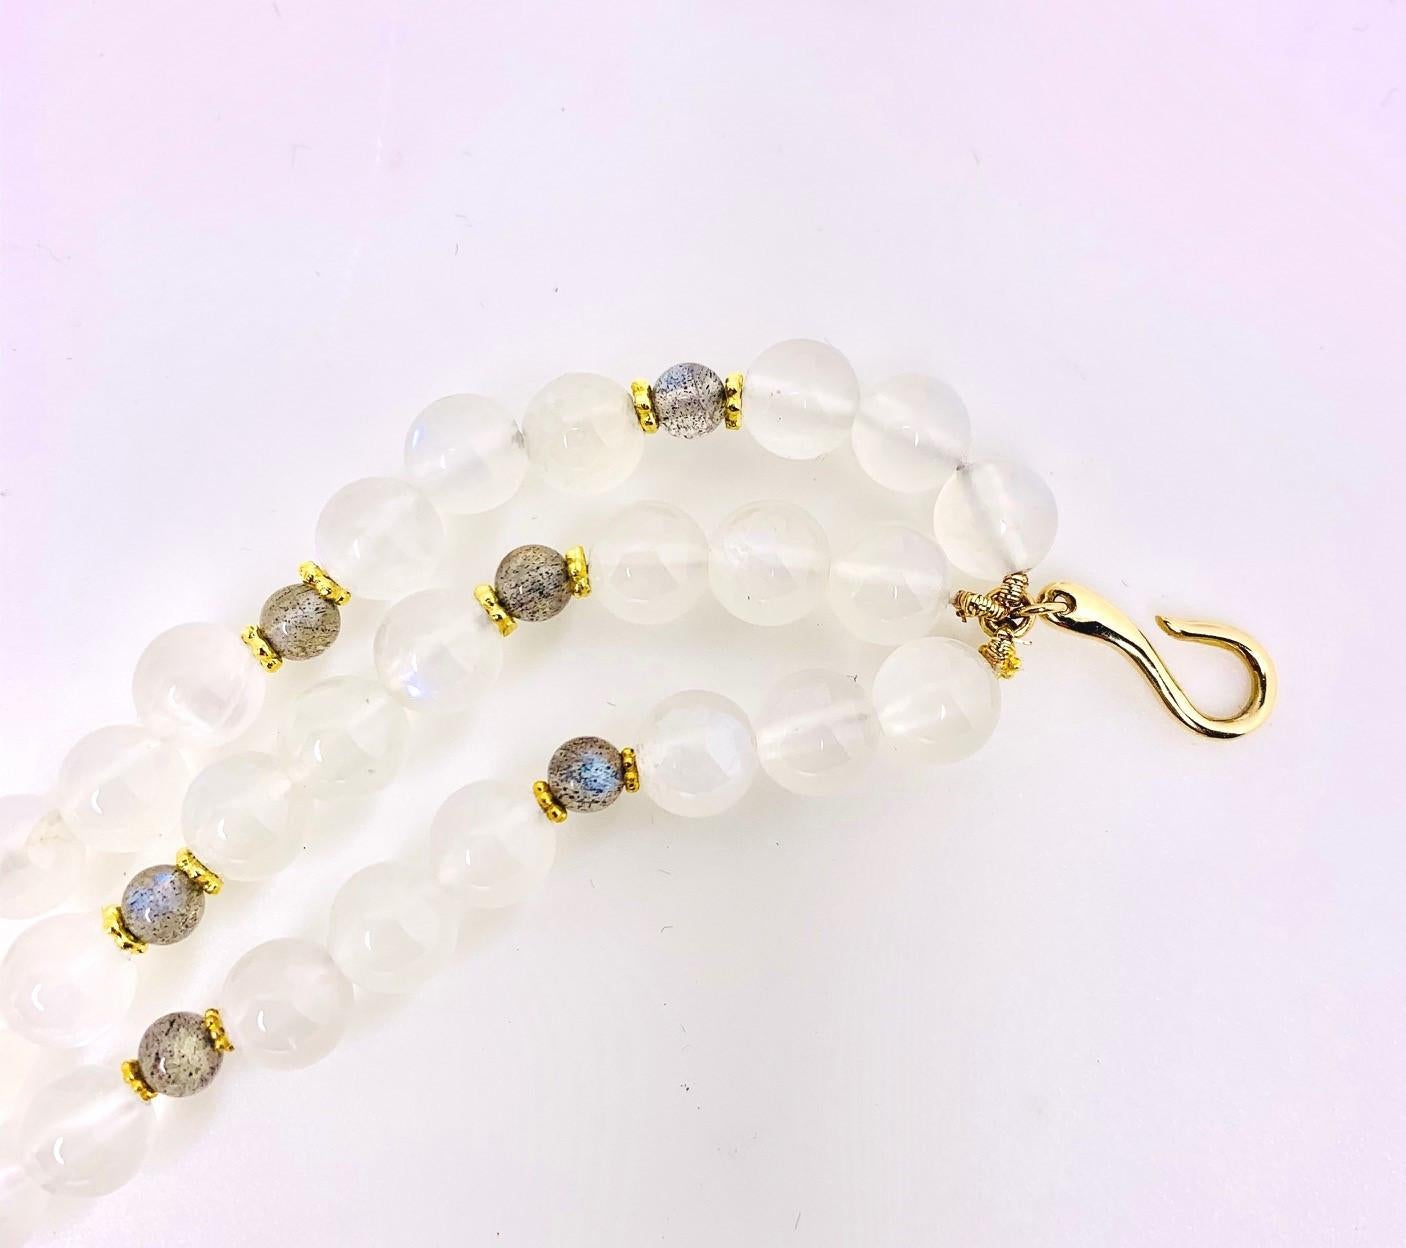 3-Strand Moonstone and Labradorite Beaded Necklace with 18k Yellow Gold Accents For Sale 1